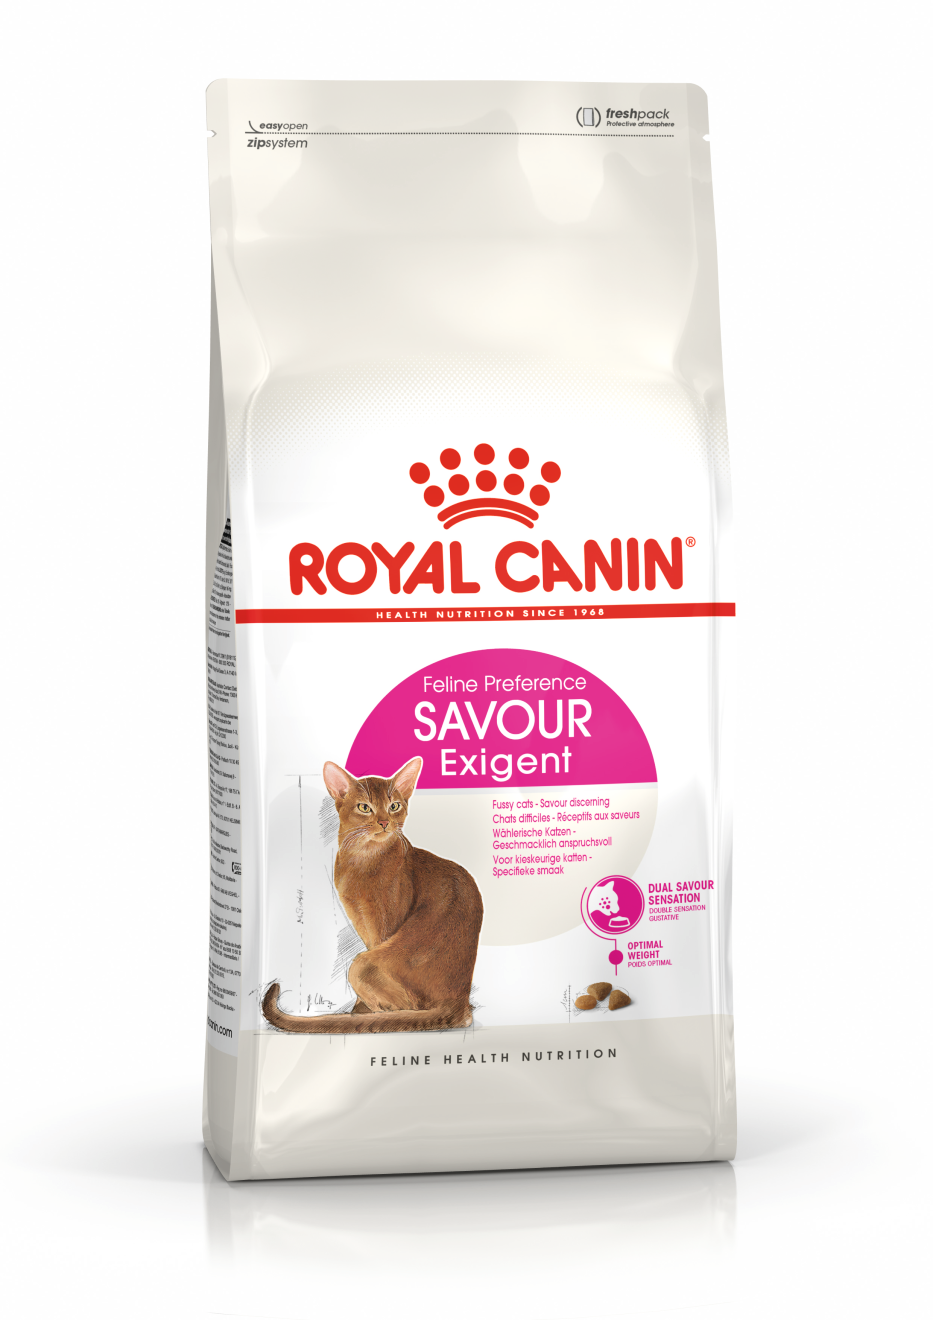 royal canin cat products